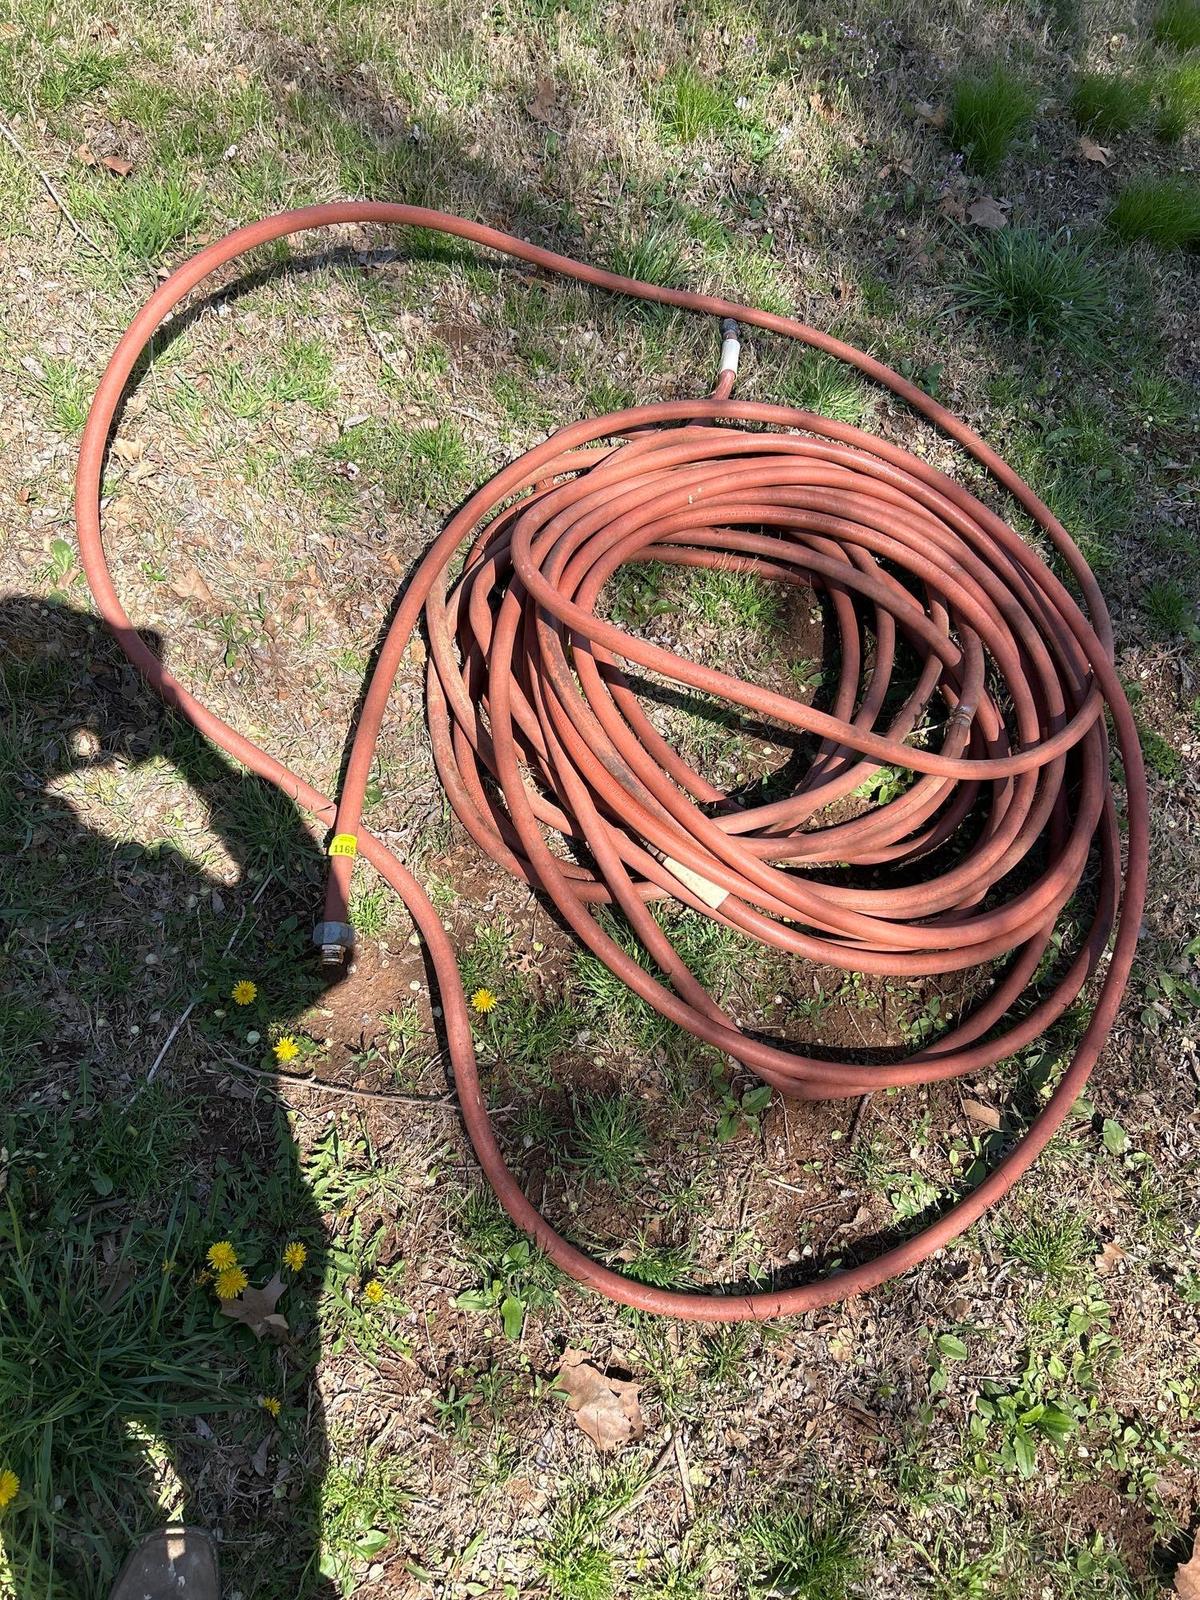 long commercial water hose